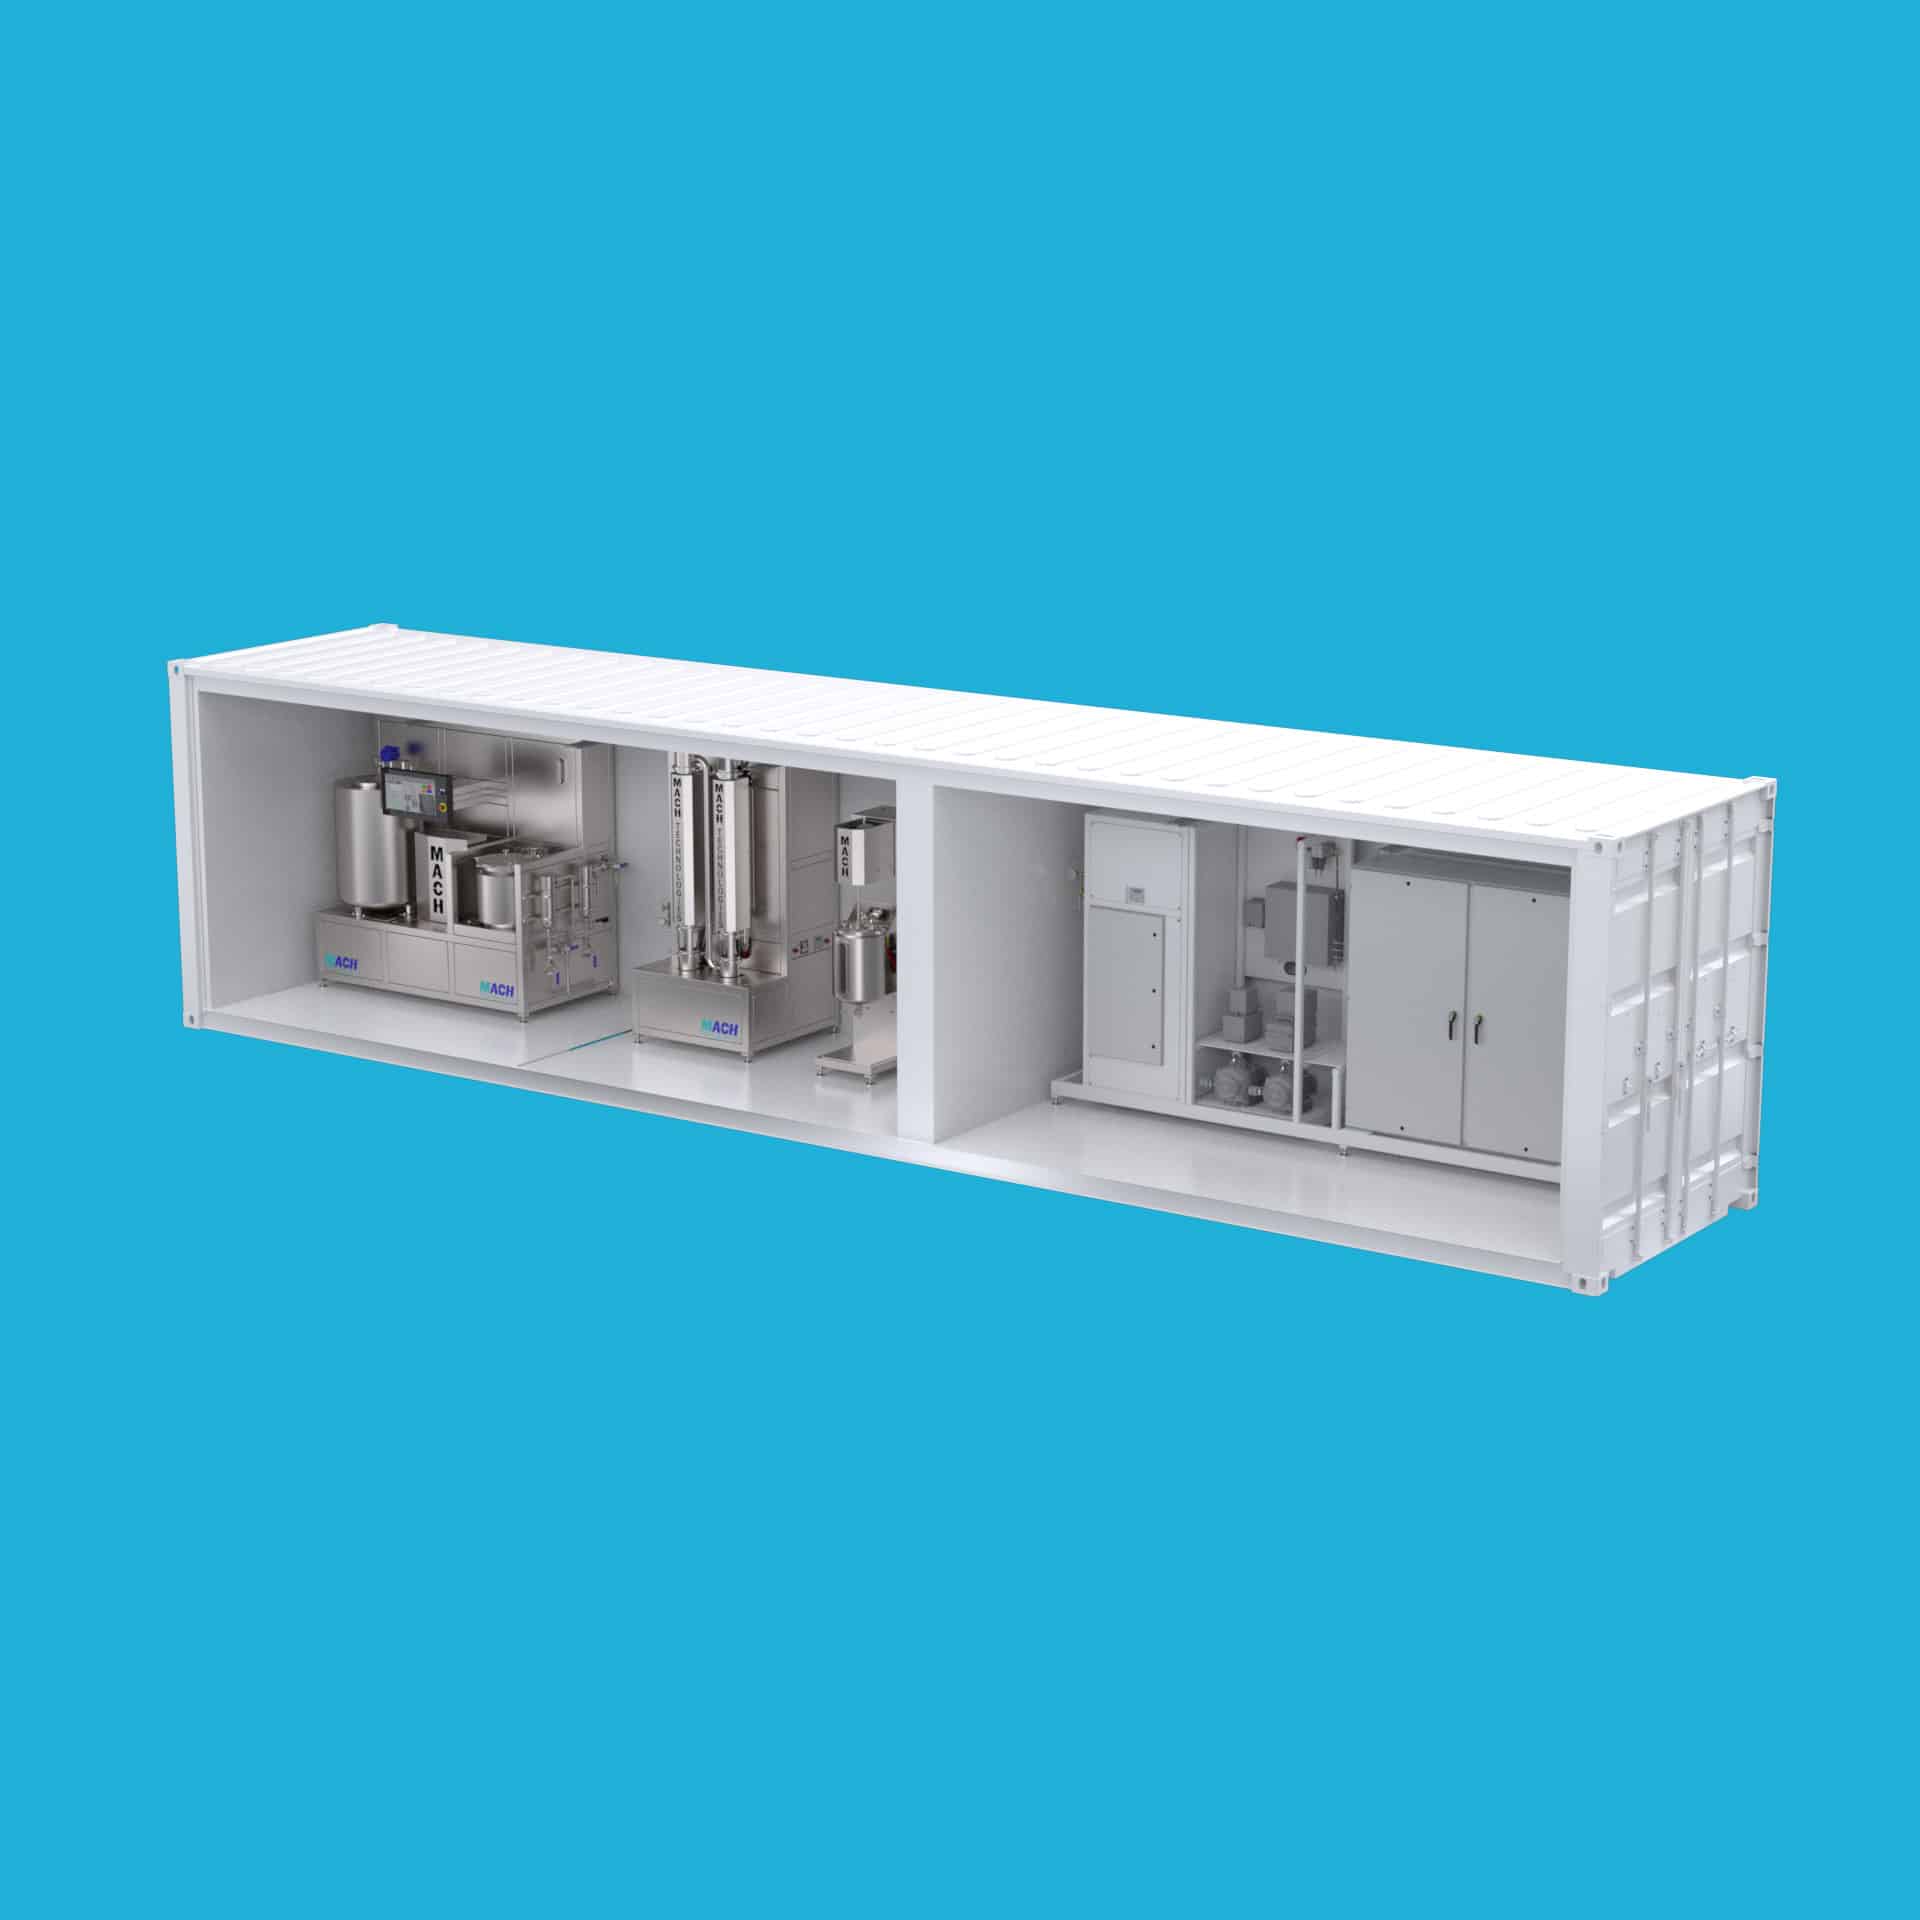 Mobile Containerized Units